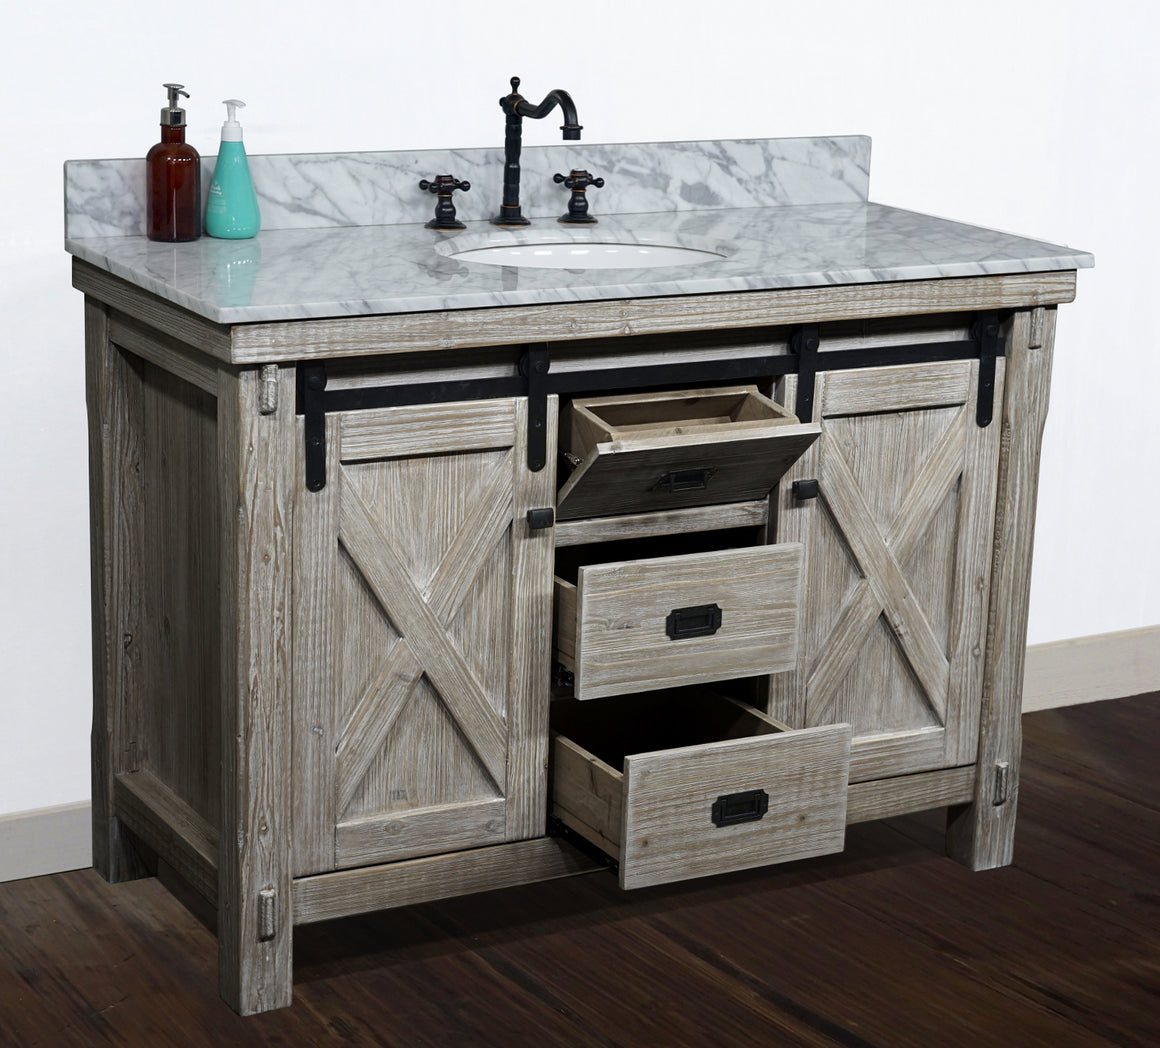 48"RUSTIC SOLID FIR BARN DOOR STYLE SINGLE SINK VANITY WITH CARRARA WHITE MARBLE TOP-NO FAUCET